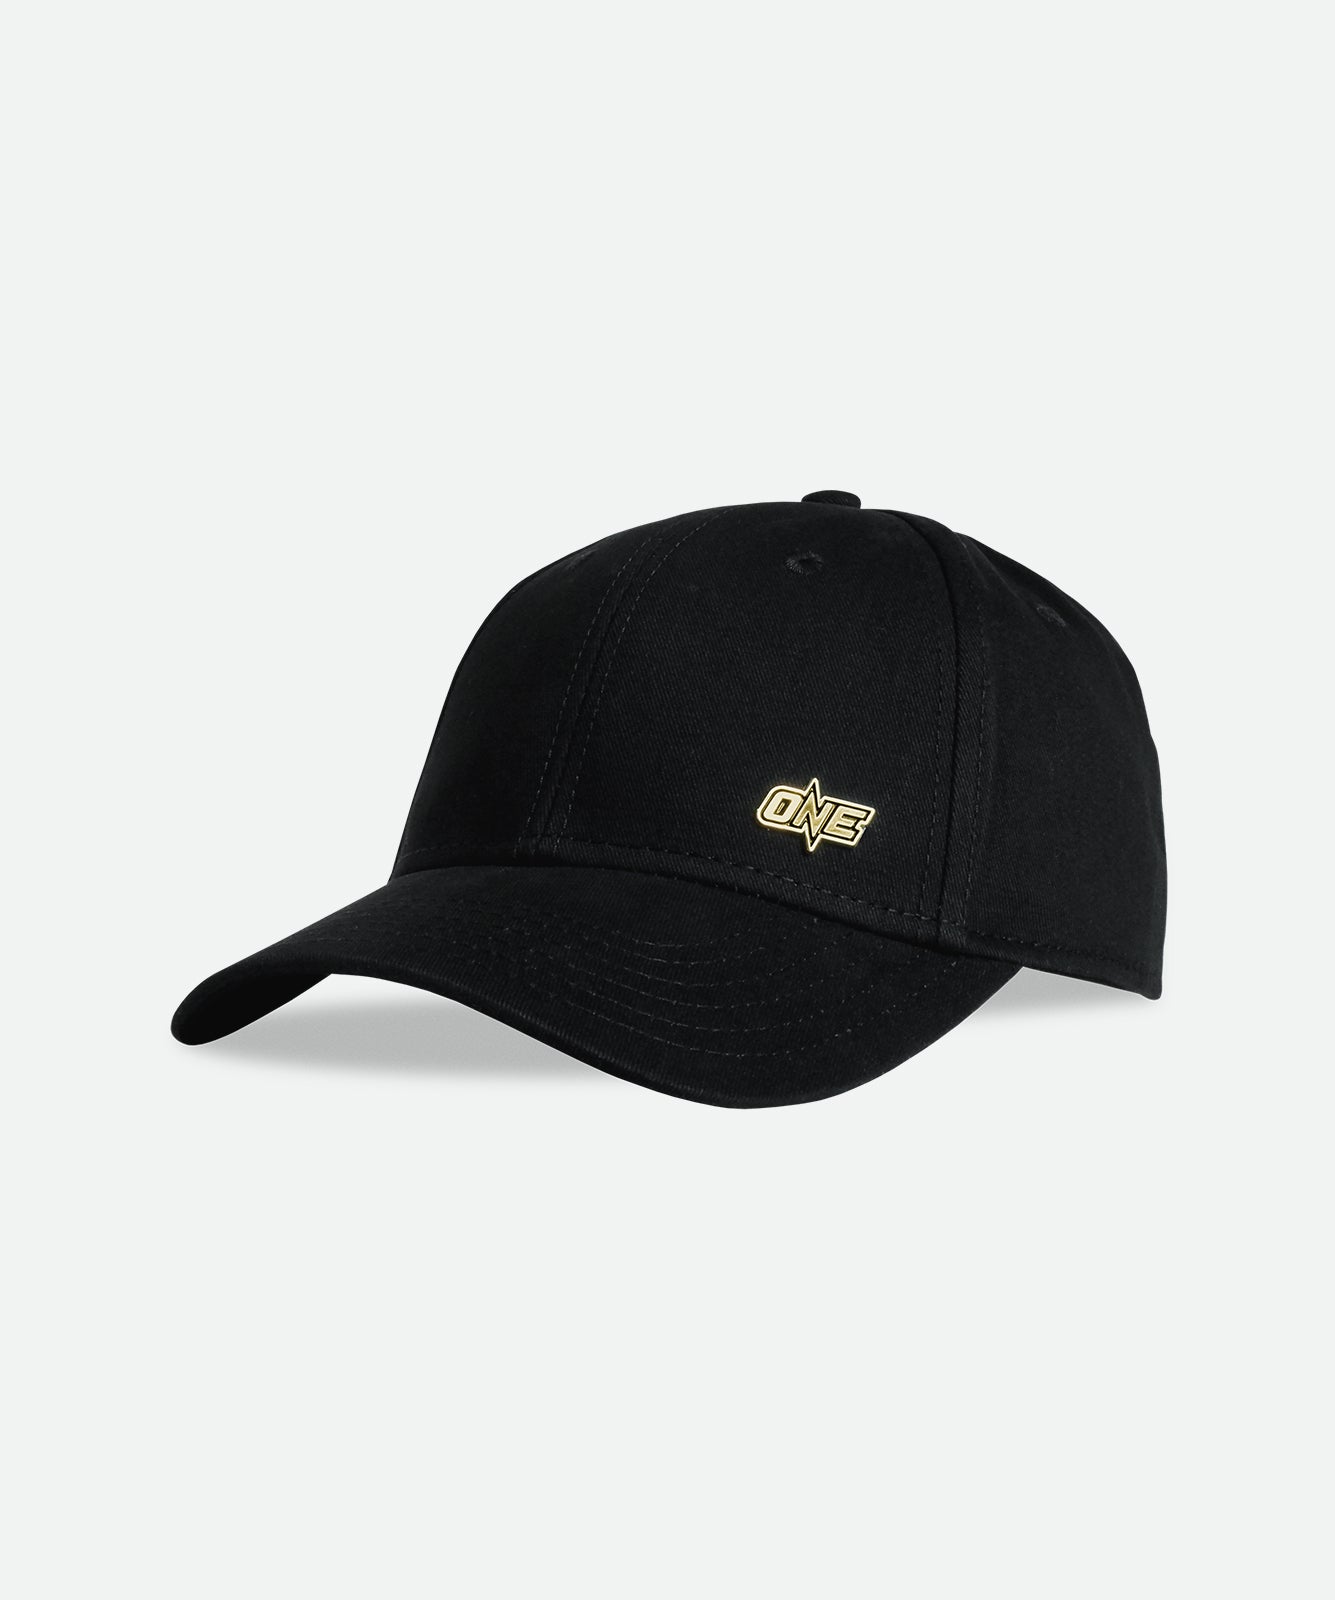 ONE Metal Logo Cap - Black/Gold - ONE.SHOP Philippines | The Official Online Shop of ONE Championship